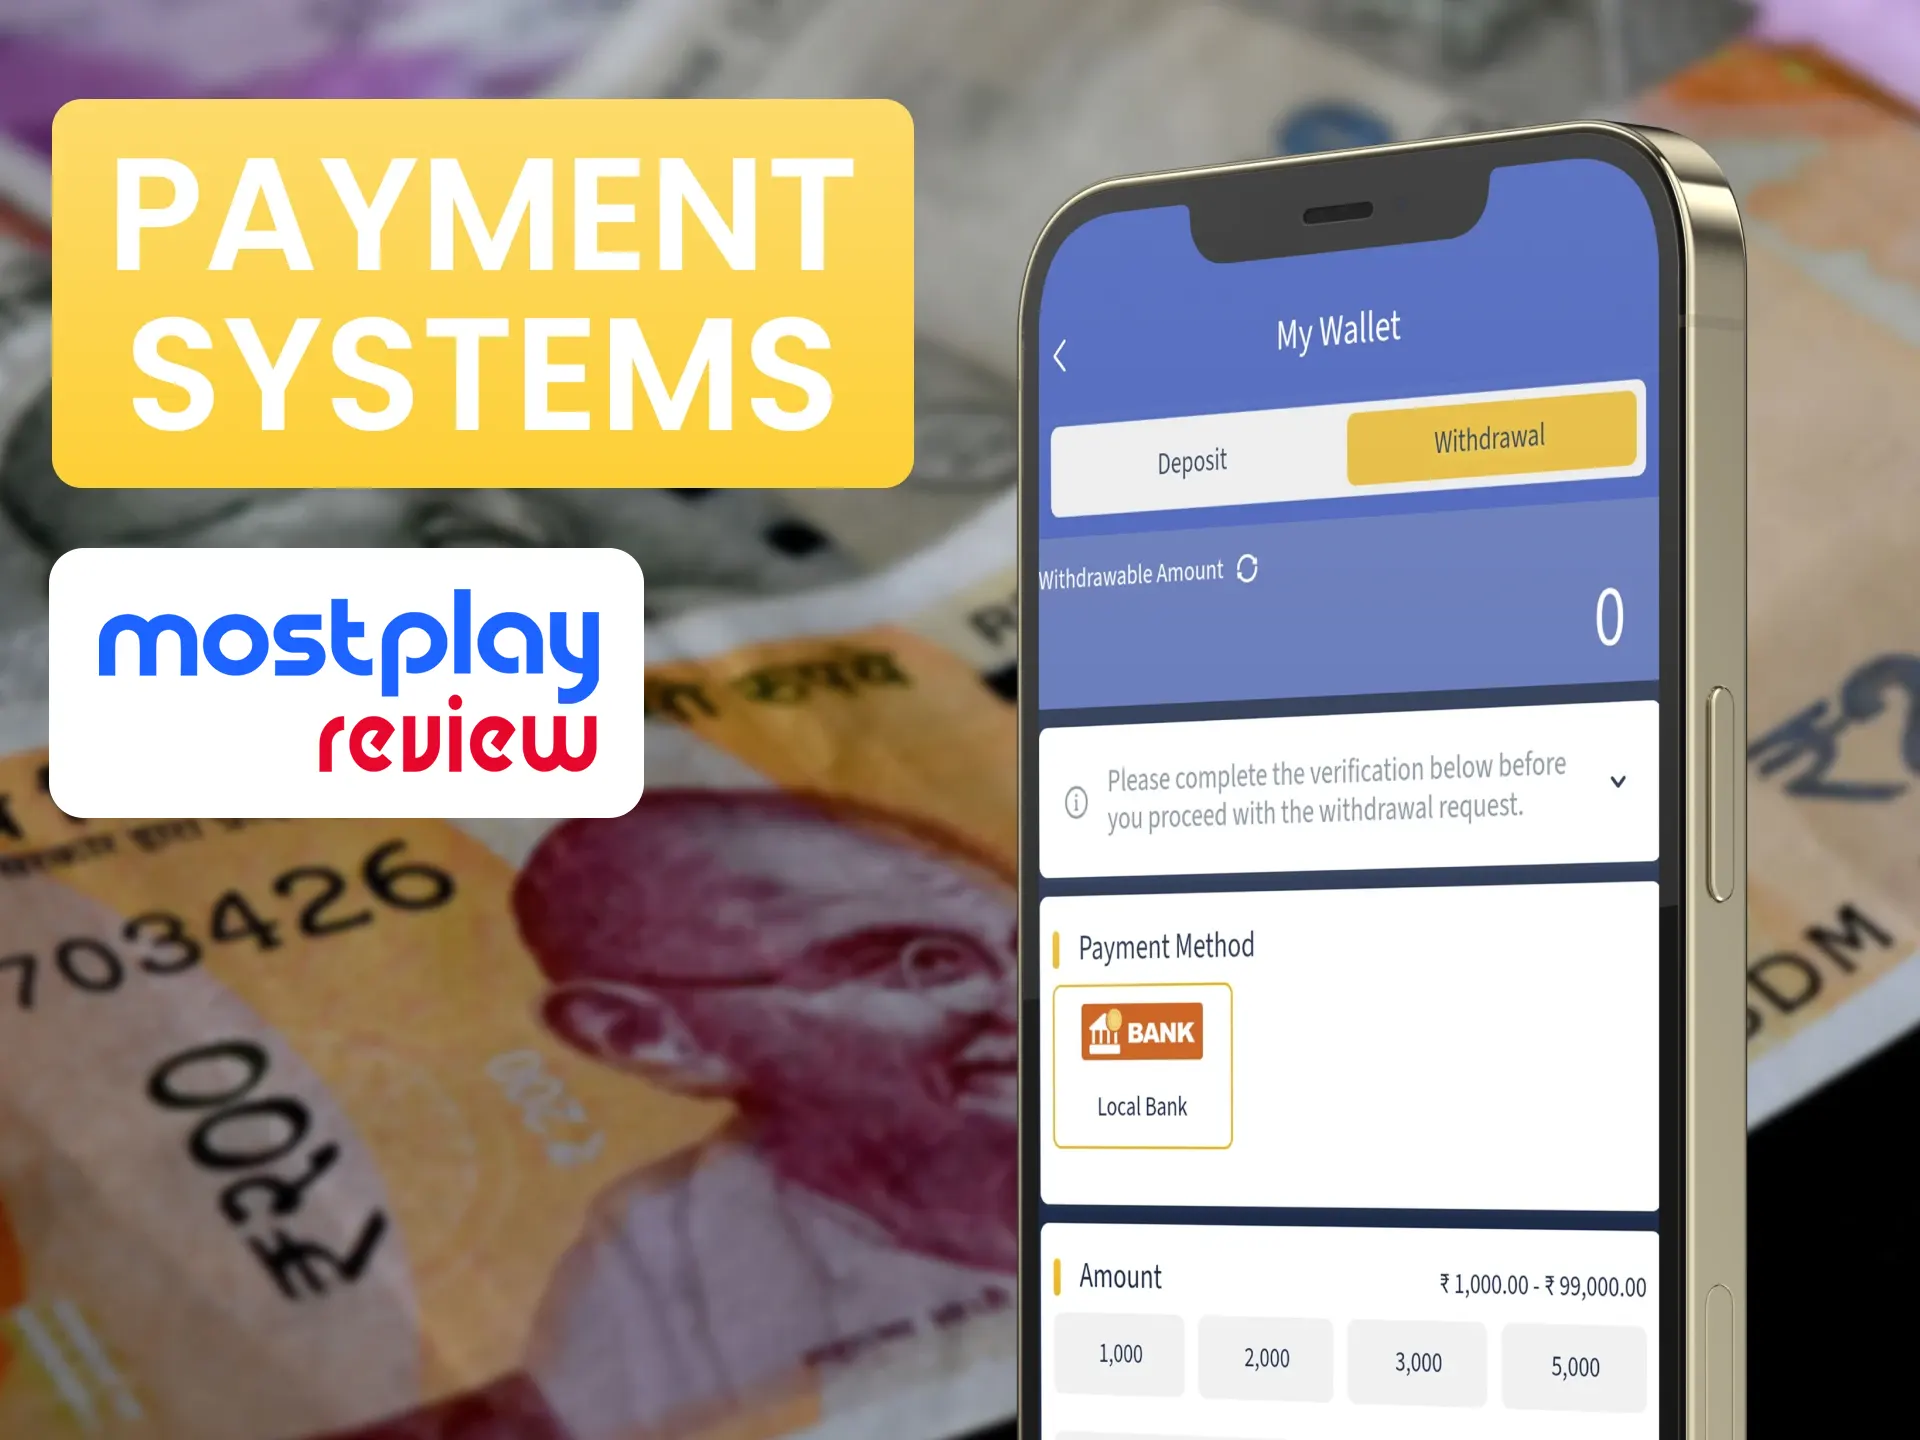 Make payments using your favourite payment system at Mostplay.